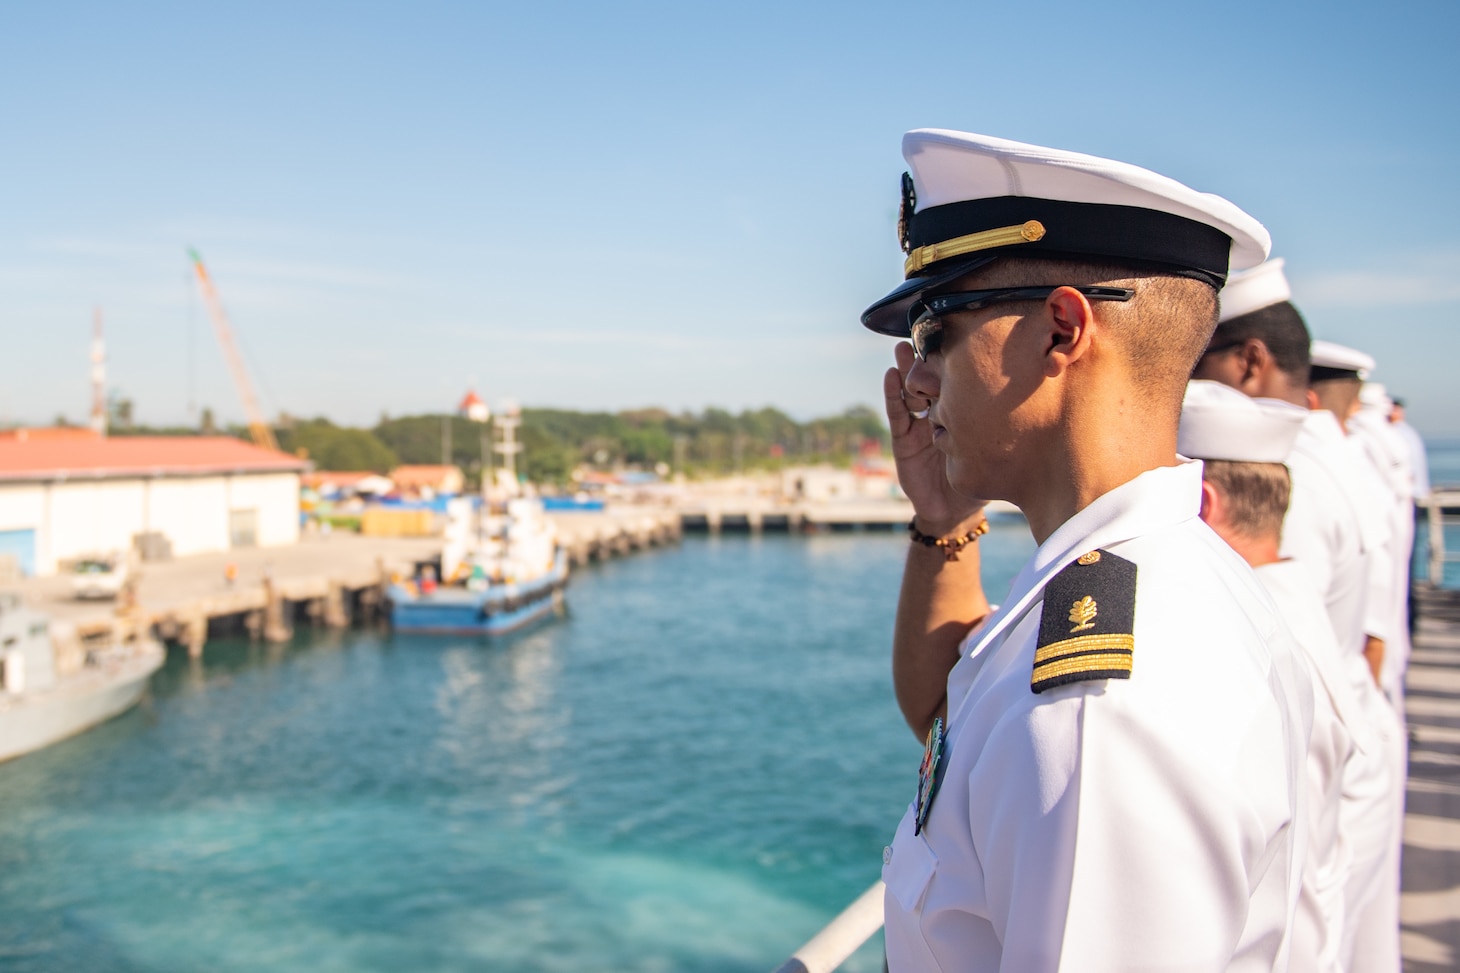 DILI, Timor-Leste (April 22, 2019) – U.S. Navy Lt. Nelson Guadalupe salutes while manning the rails of the fast expeditionary transport ship USNS Fall River (T-EPF 4) during its arrival in Timor-Leste for Pacific Partnership 2019. Pacific Partnership, now in its 14th iteration, is the largest annual multinational humanitarian assistance and disaster relief preparedness mission conducted in the Indo-Pacific. Each year the mission team works collectively with host and partner nations to enhance regional interoperability and disaster response capabilities, increase security and stability in the region, and foster new and enduring friendships in the Indo-Pacific.